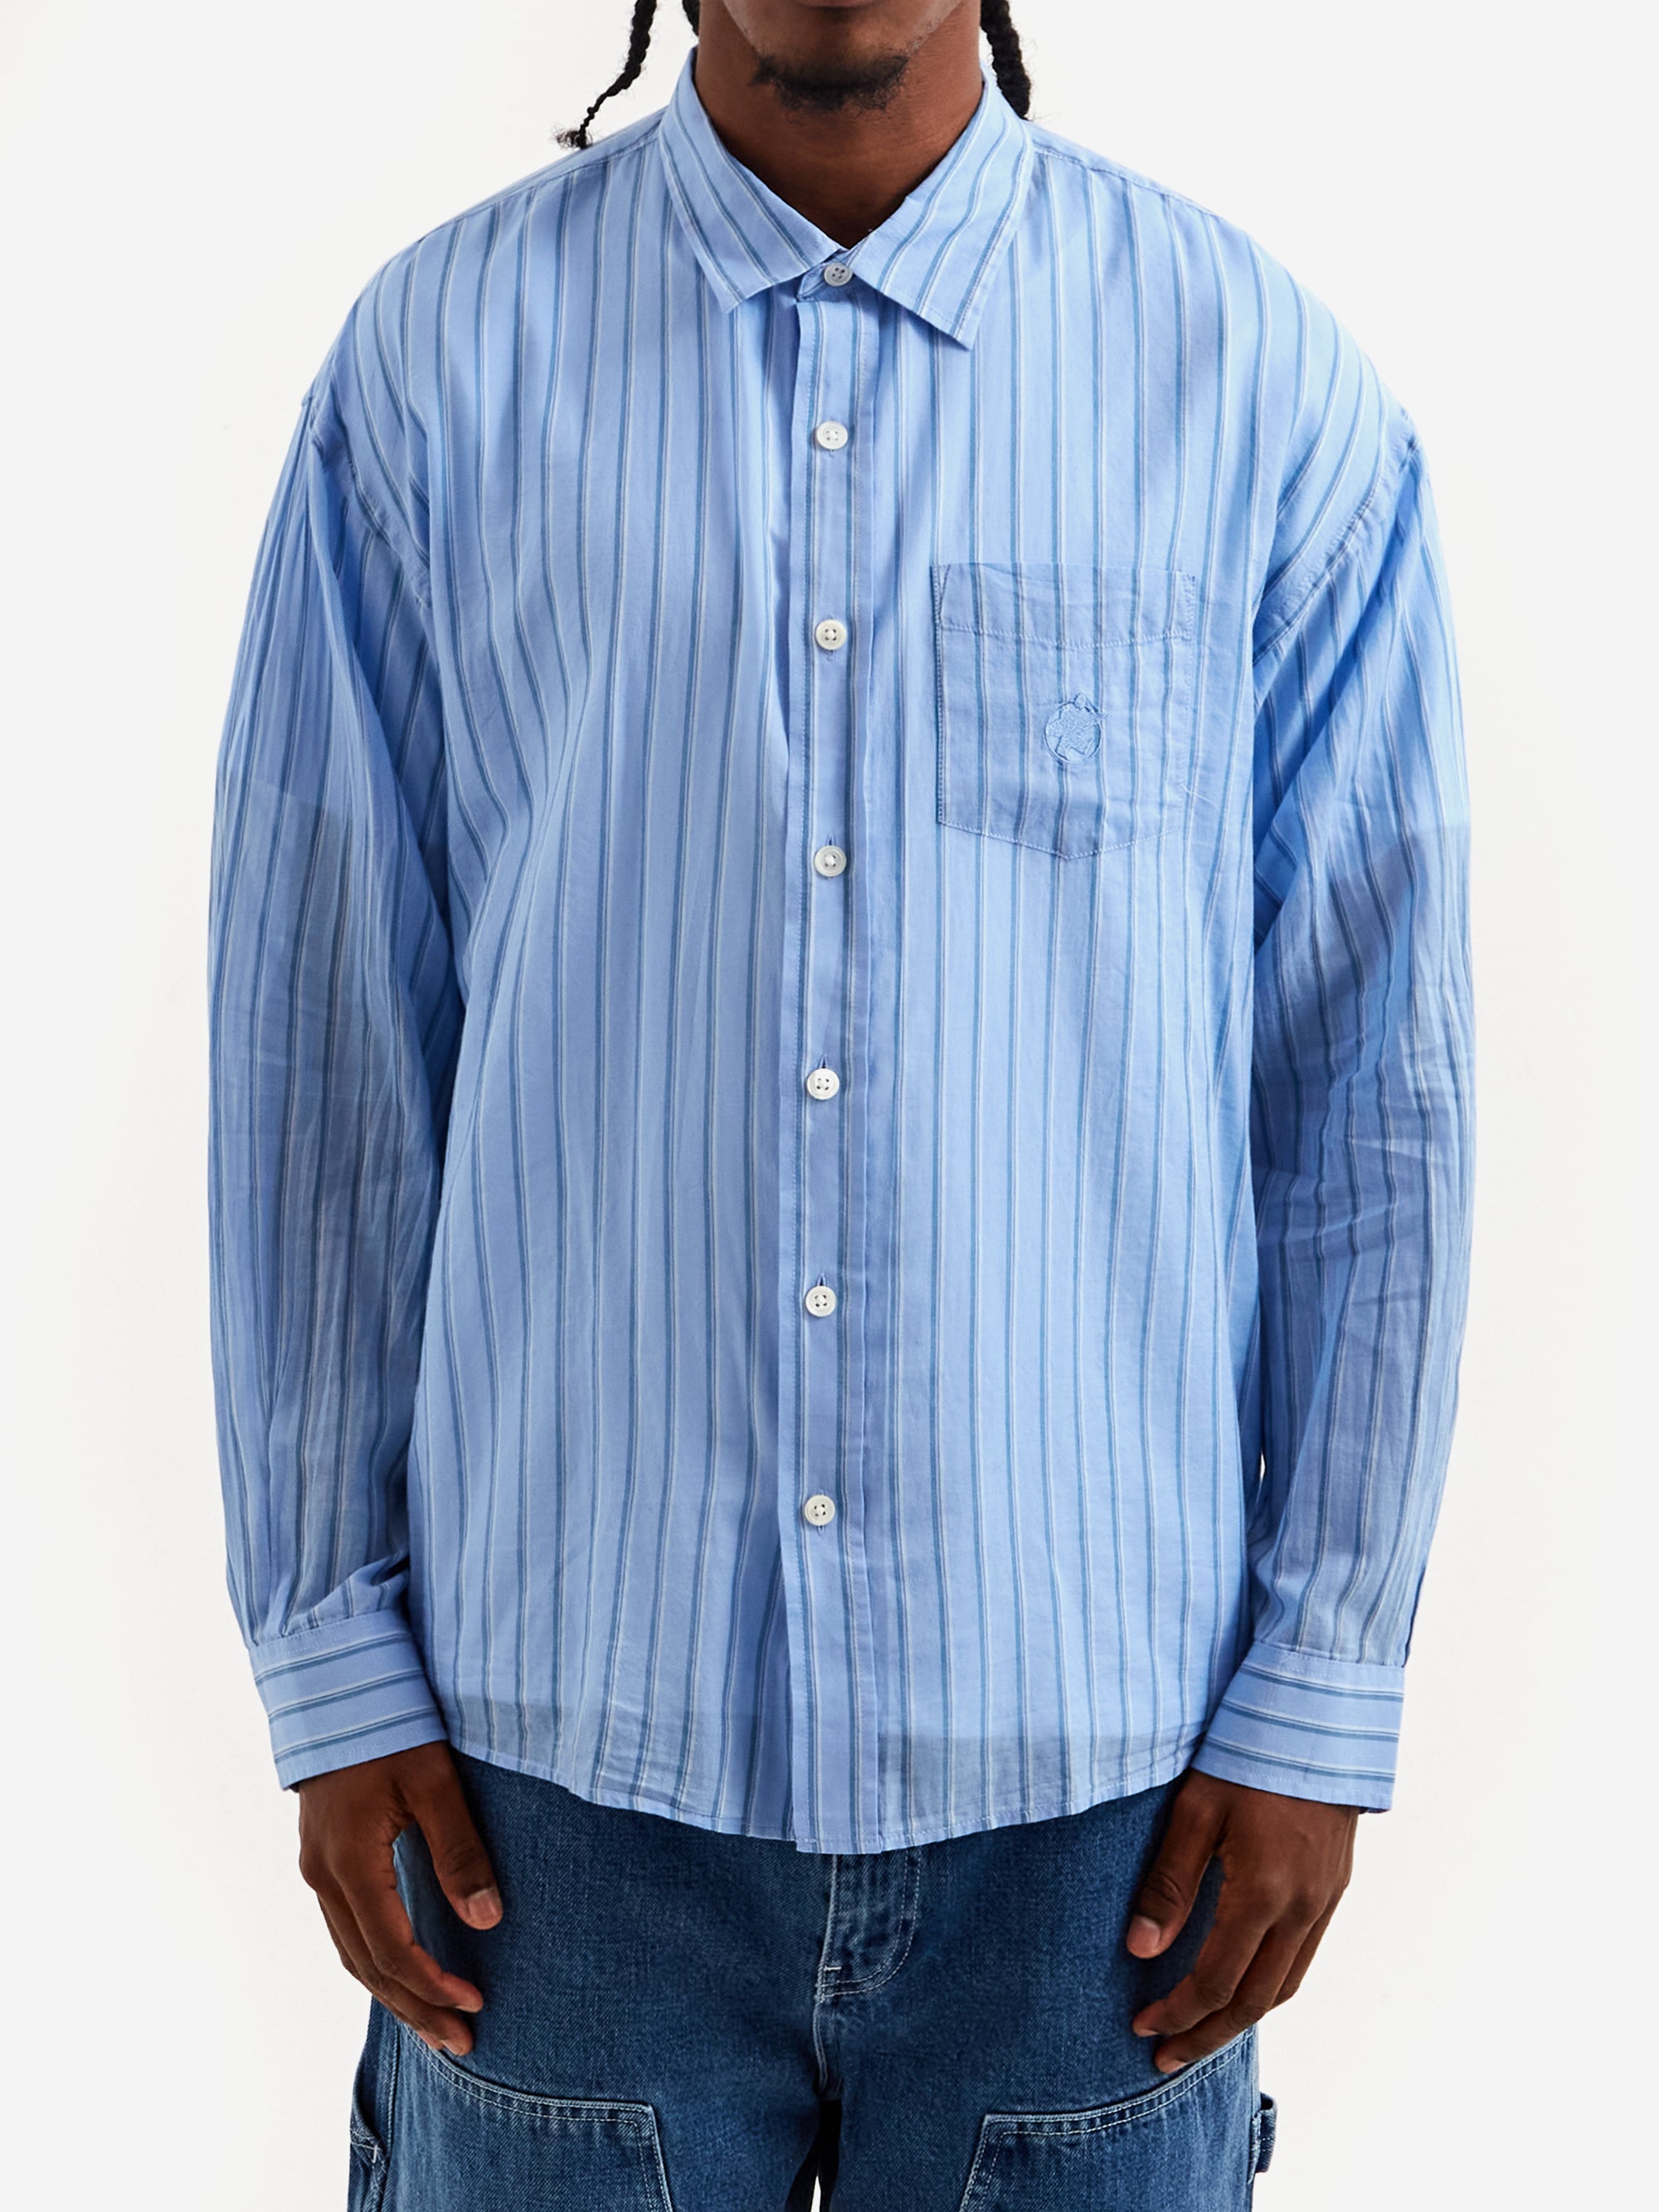 STUSSY LIGHT WEIGHT CLASSIC SHIRT 23aw - トップス